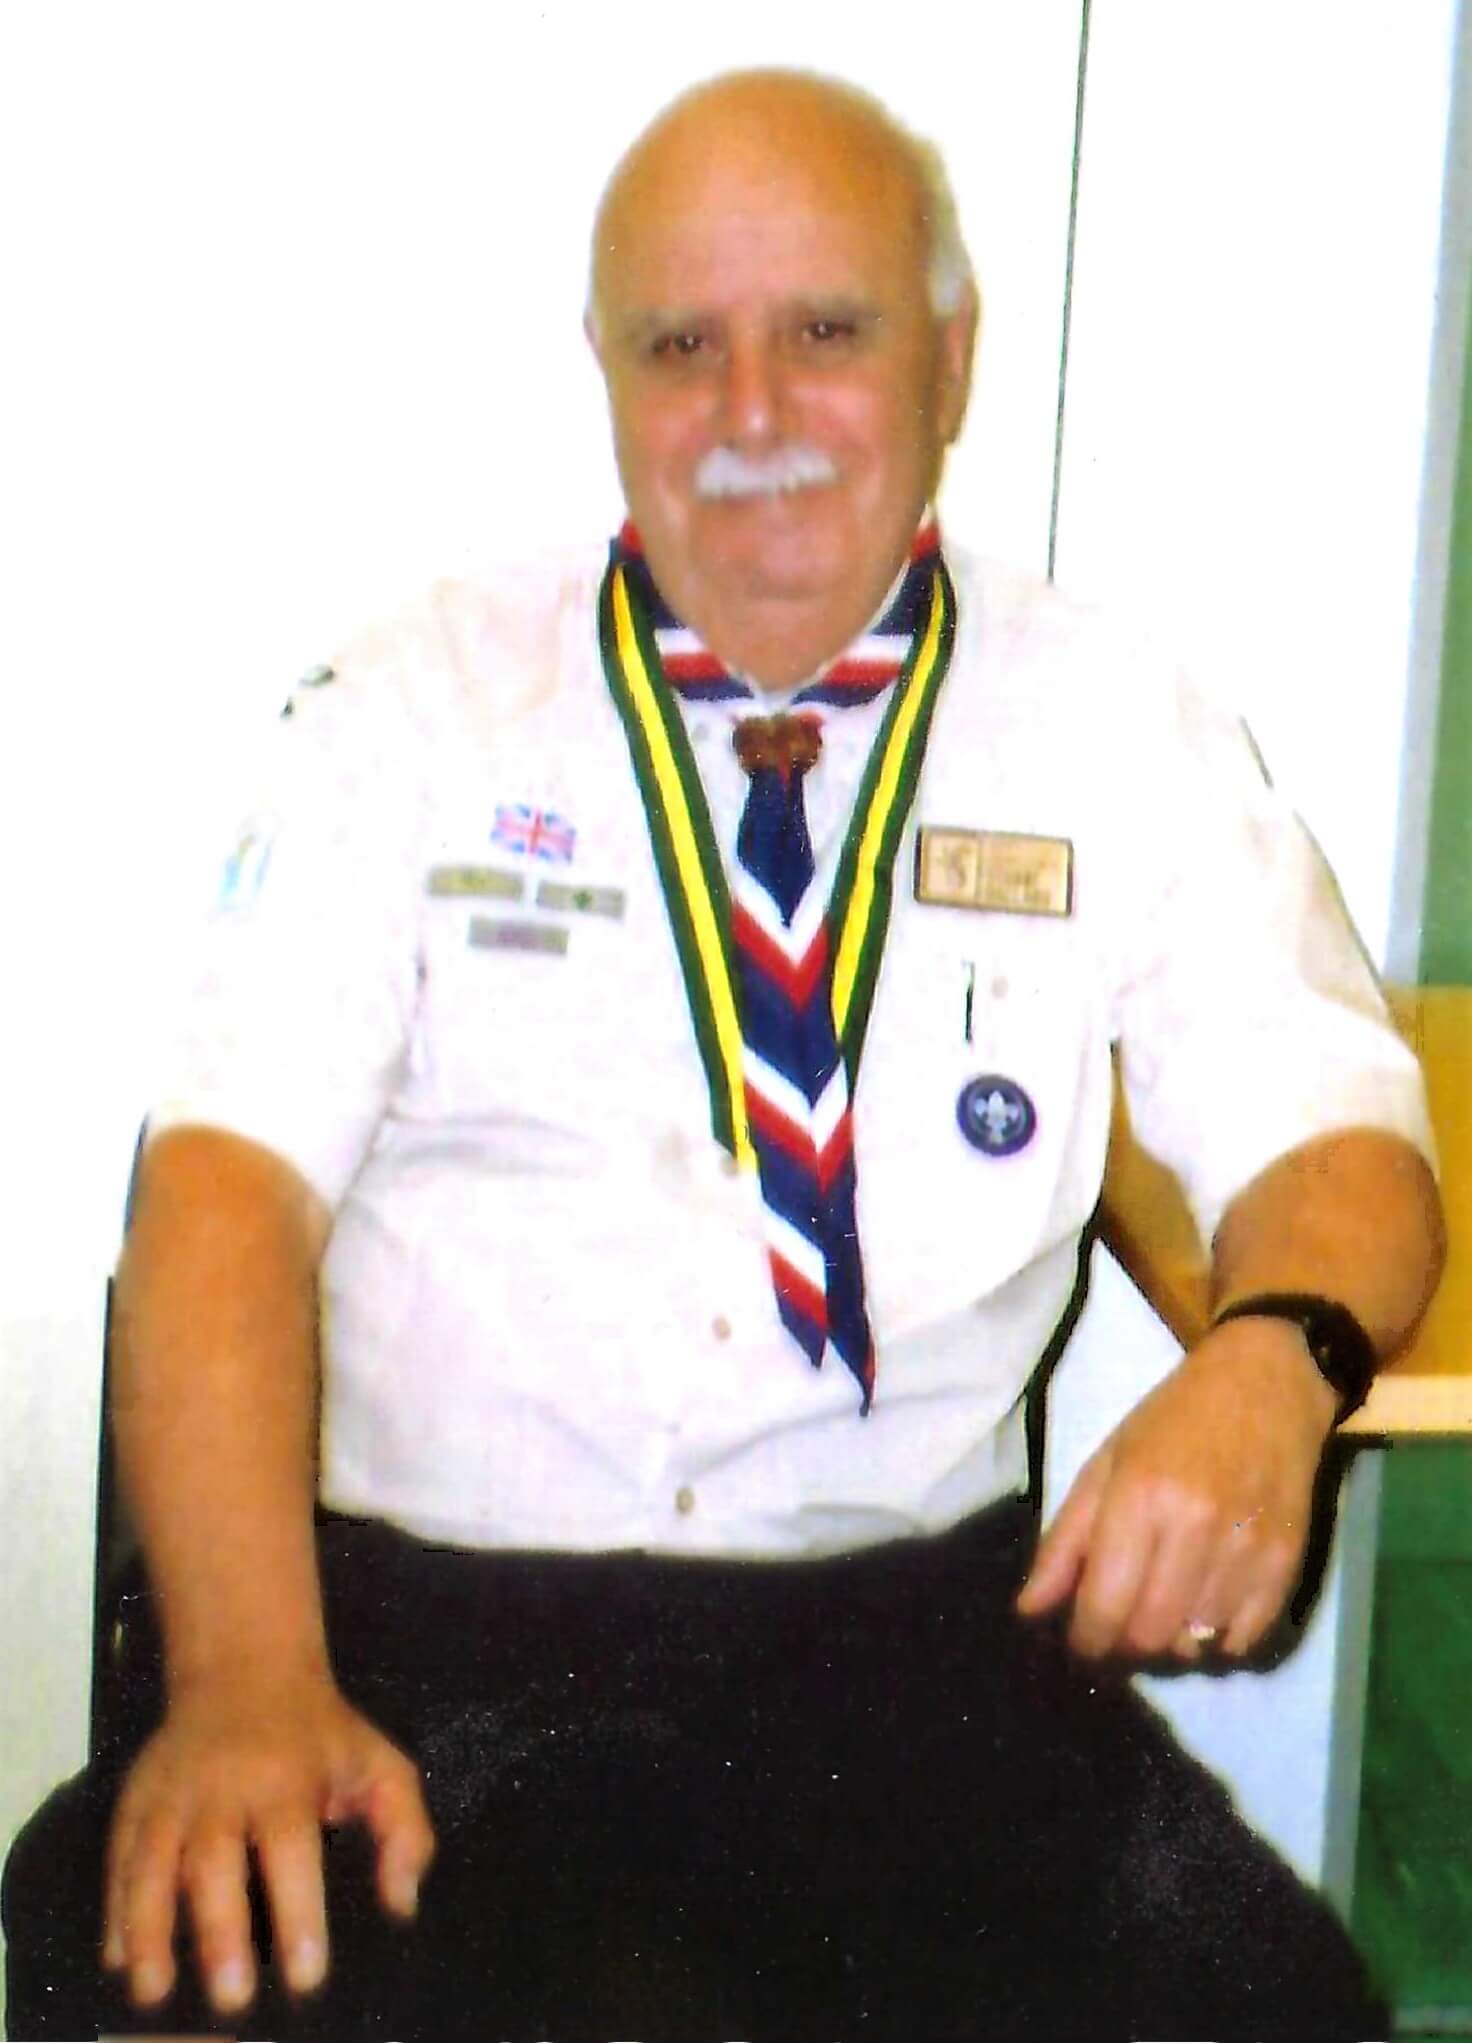 Stuart, wearing a white short-sleeved shirt, red, white and blue scarf and green and yellow medal, smiles at the camera while sitting in a chair.